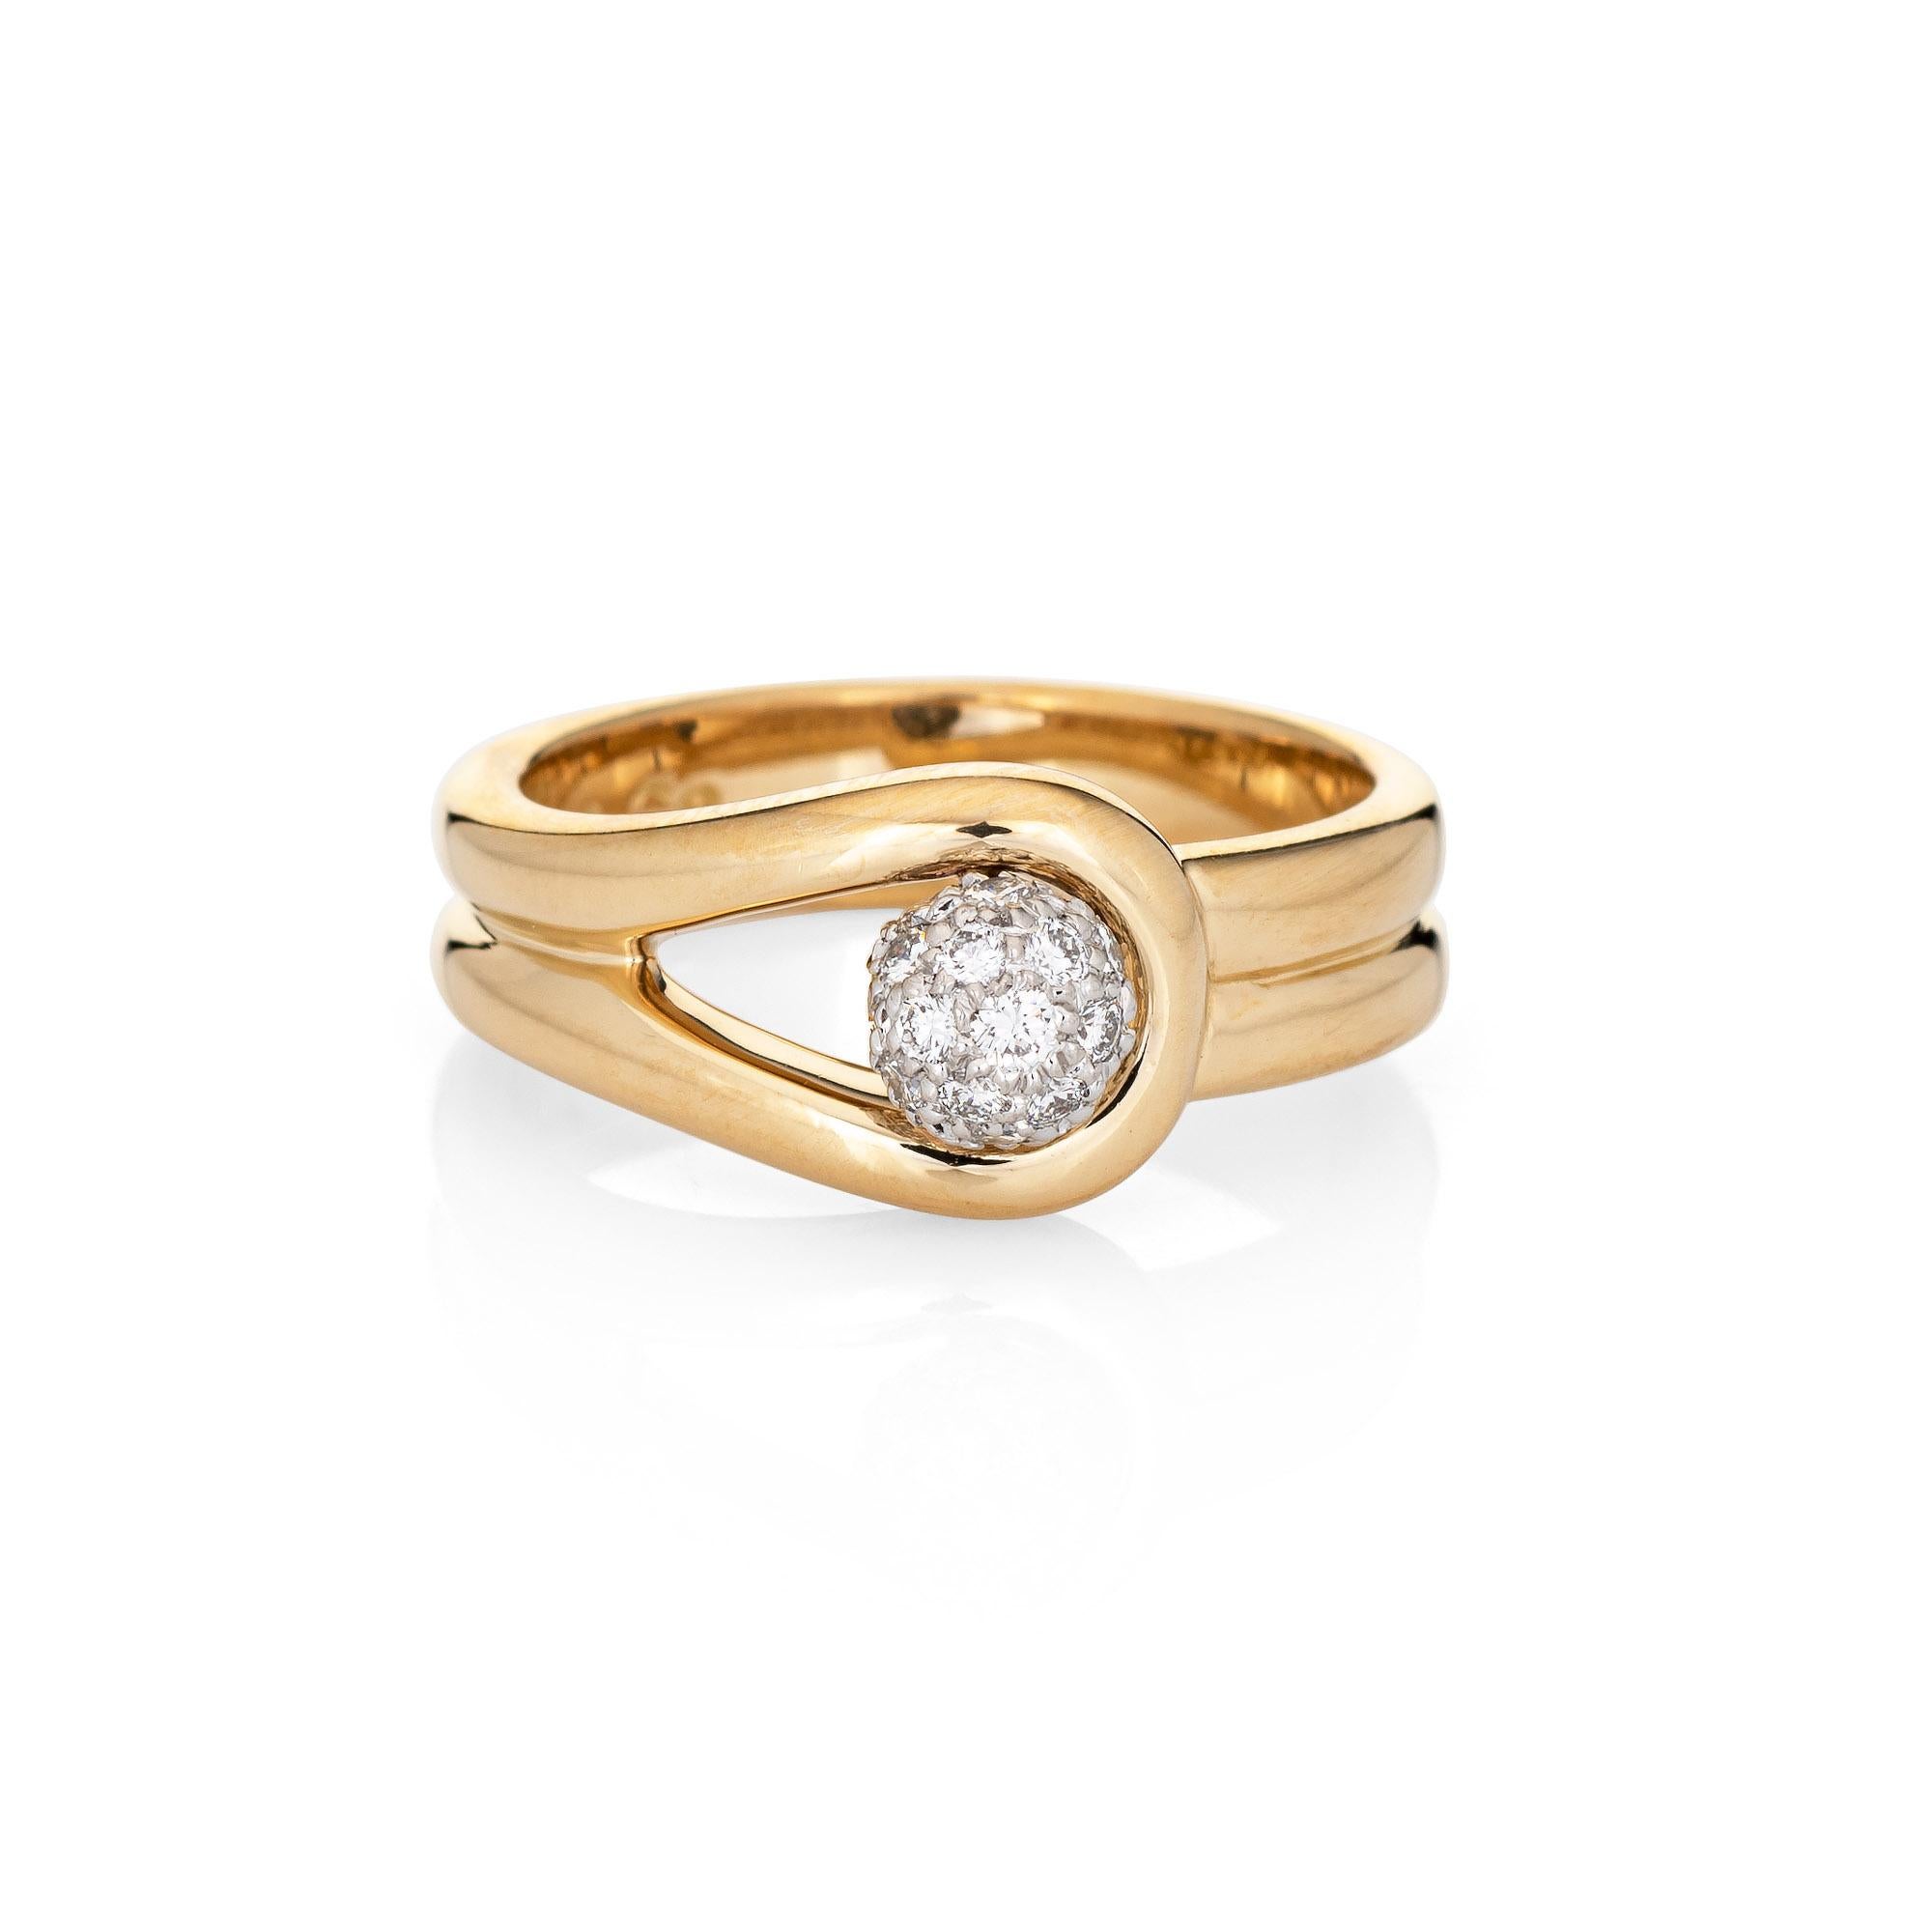 Vintage Tiffany & Co diamond orb ring (attributed to Paloma Picasso), crafted in 18 karat yellow gold & platinum (circa 1980s).  

Round brilliant cut diamonds total an estimated 0.25 carats (estimated at G-H color and VS1-2 clarity).

Dating to the